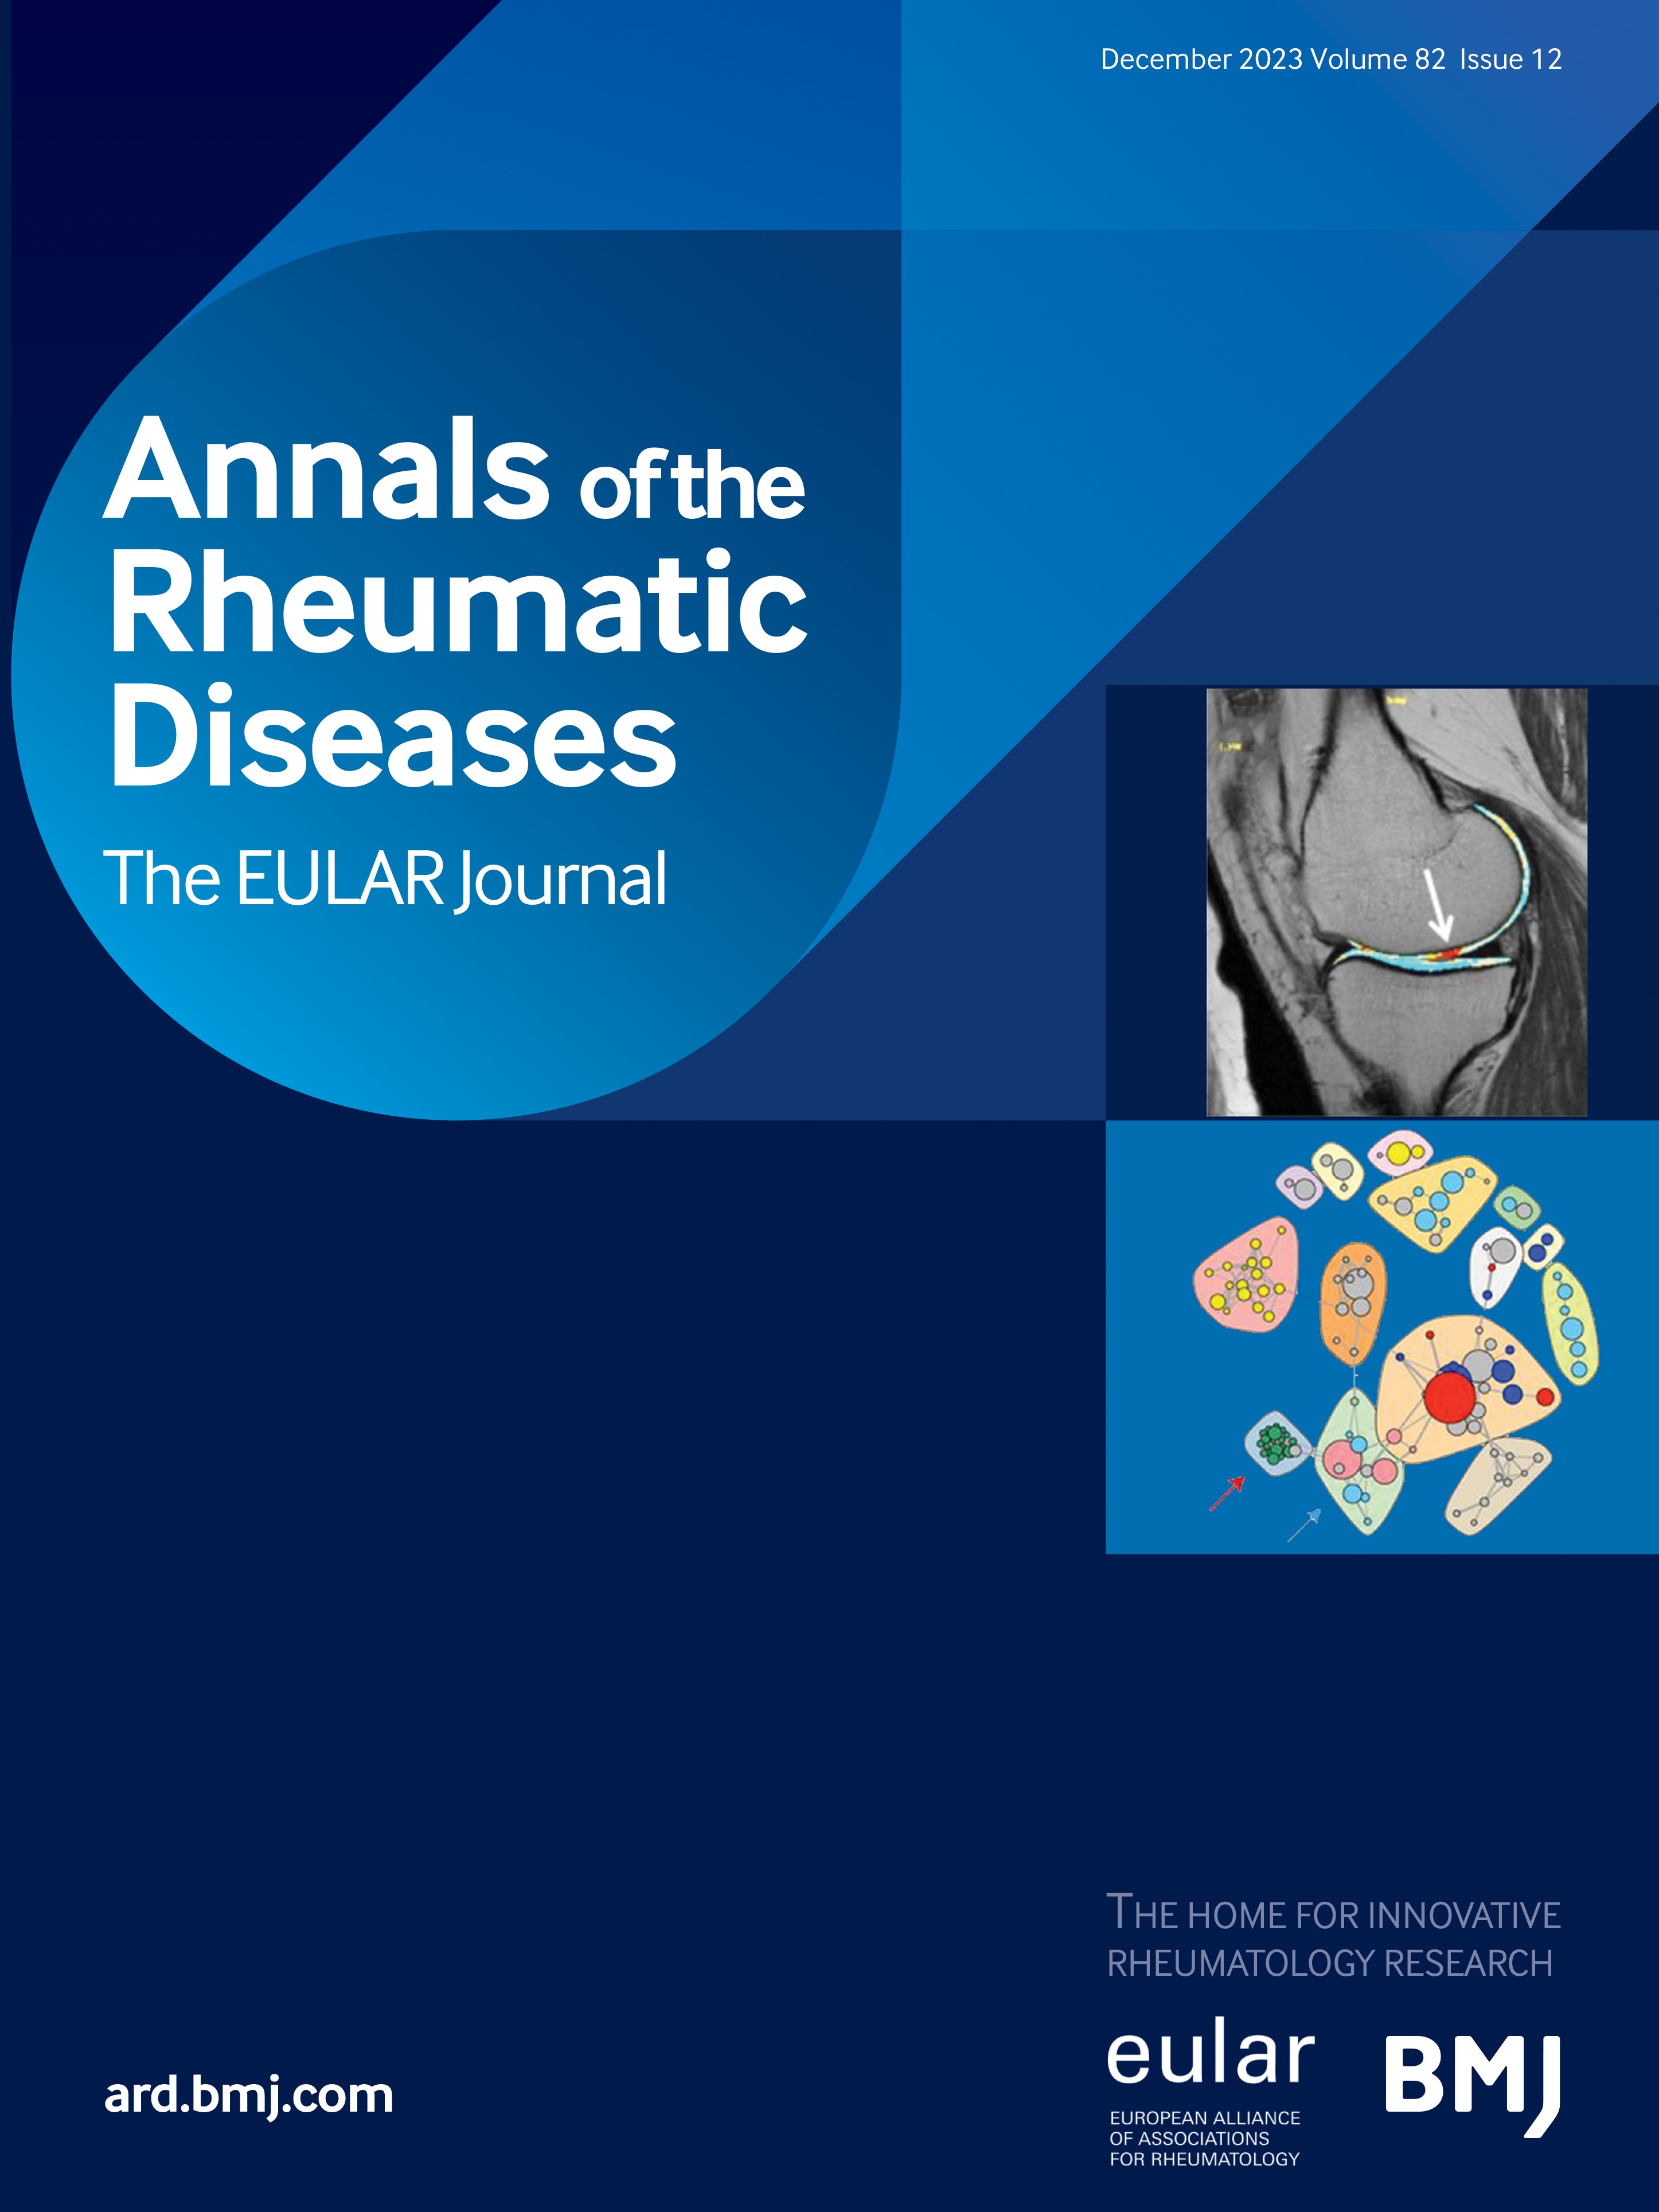 Dupilumab for relapsing or refractory sinonasal and/or asthma manifestations in eosinophilic granulomatosis with polyangiitis: a European retrospective study